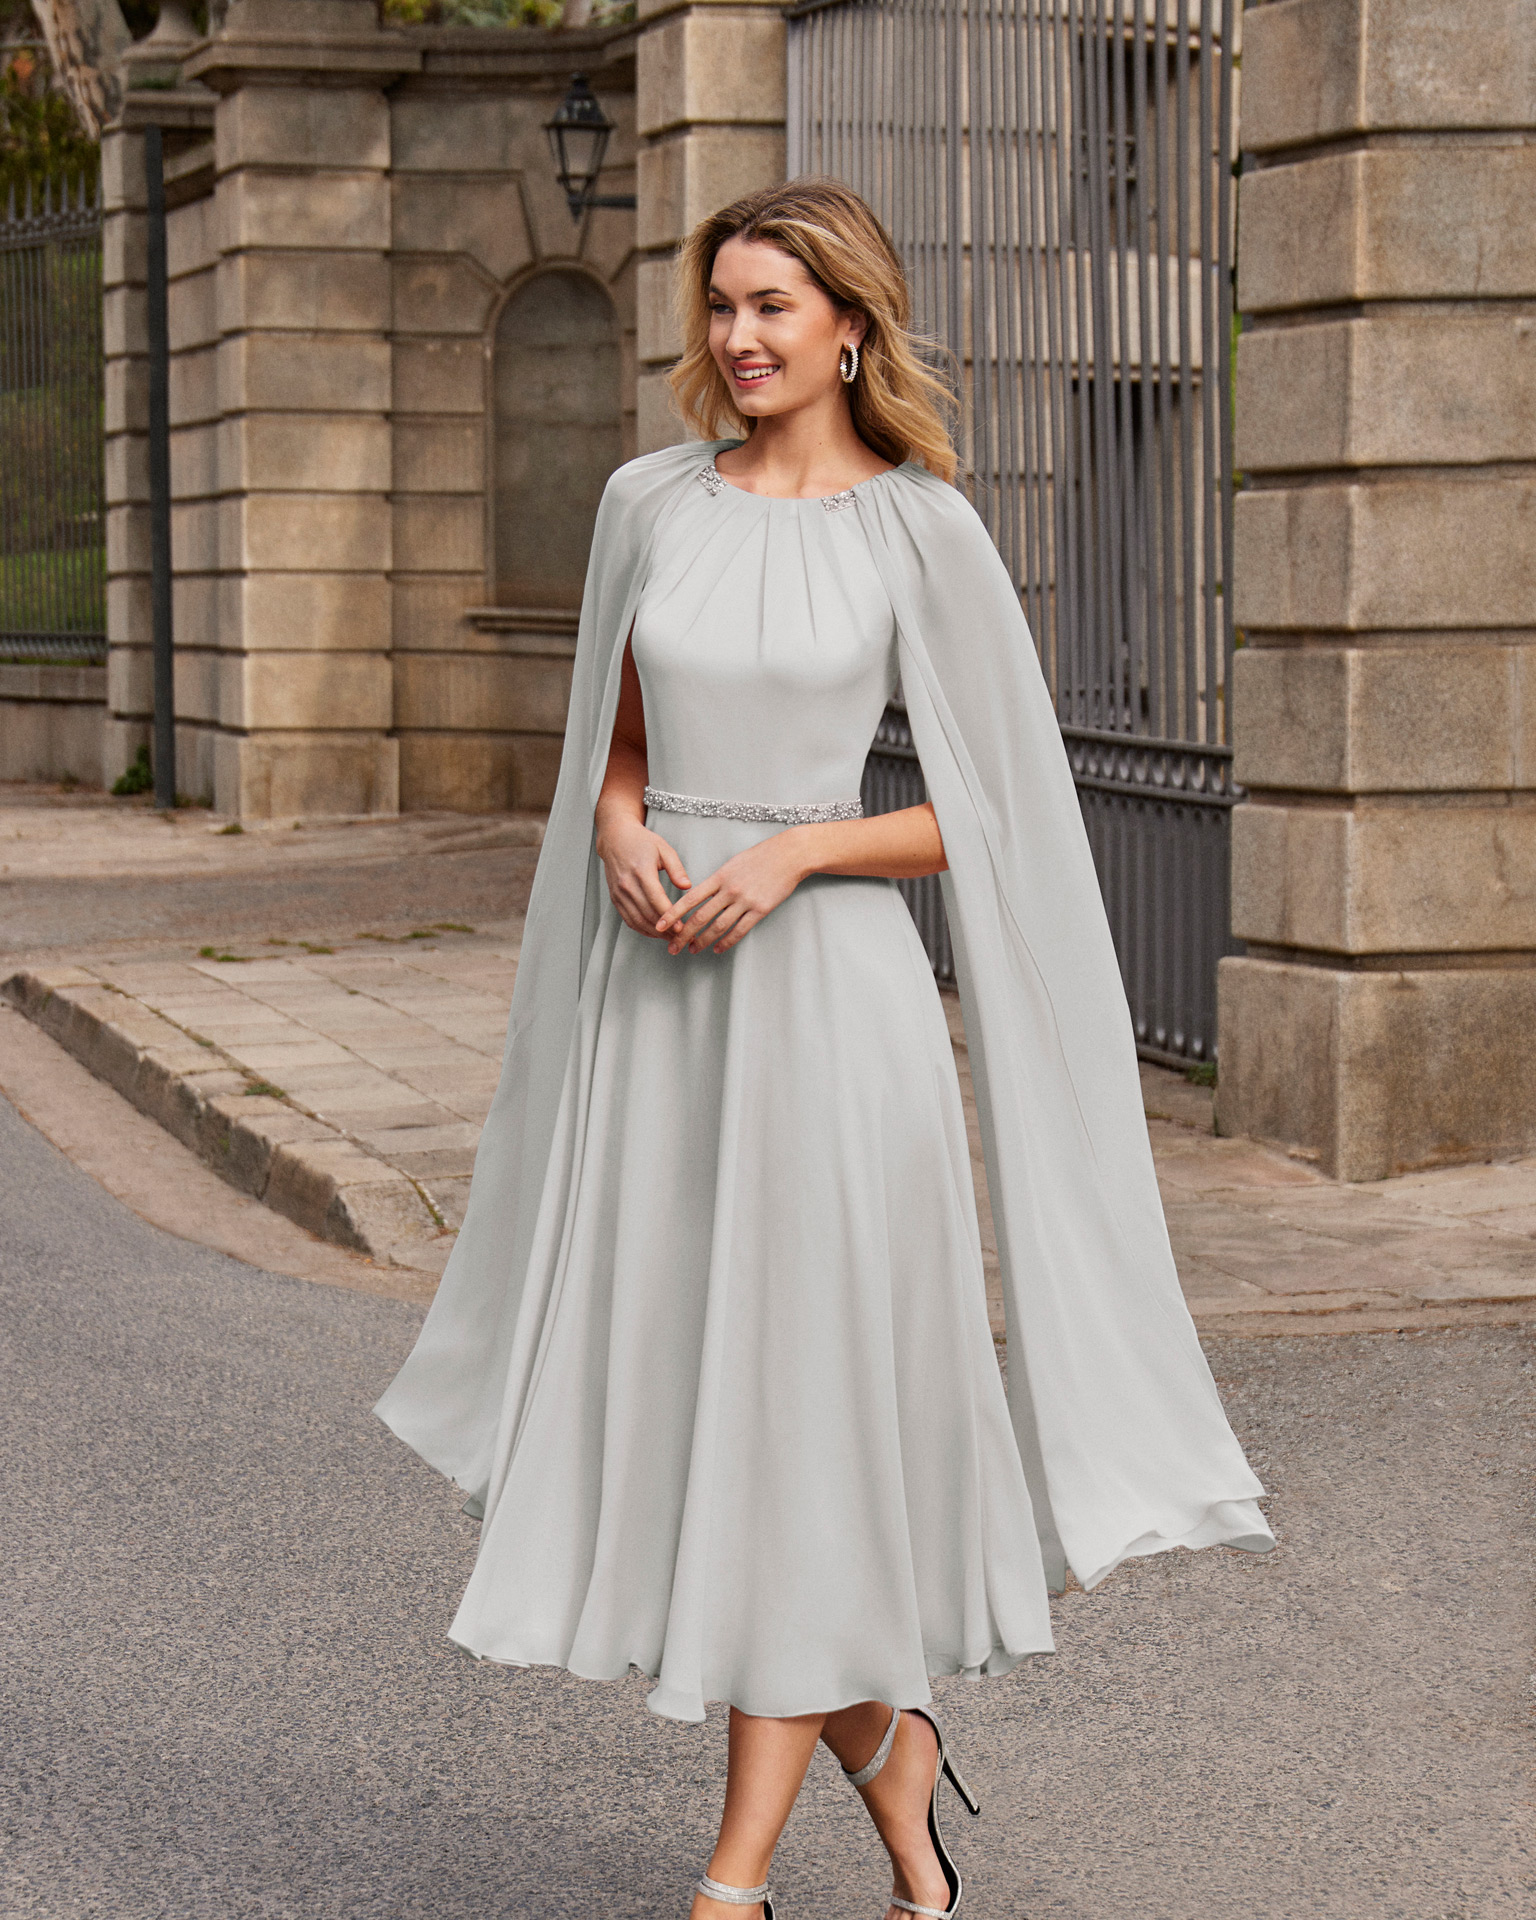 Short cocktail dress made of georgette. Couture Club design with a round neckline, long cape sleeves, and beadwork details at the waist and neckline. MARFIL_BARCELONA.